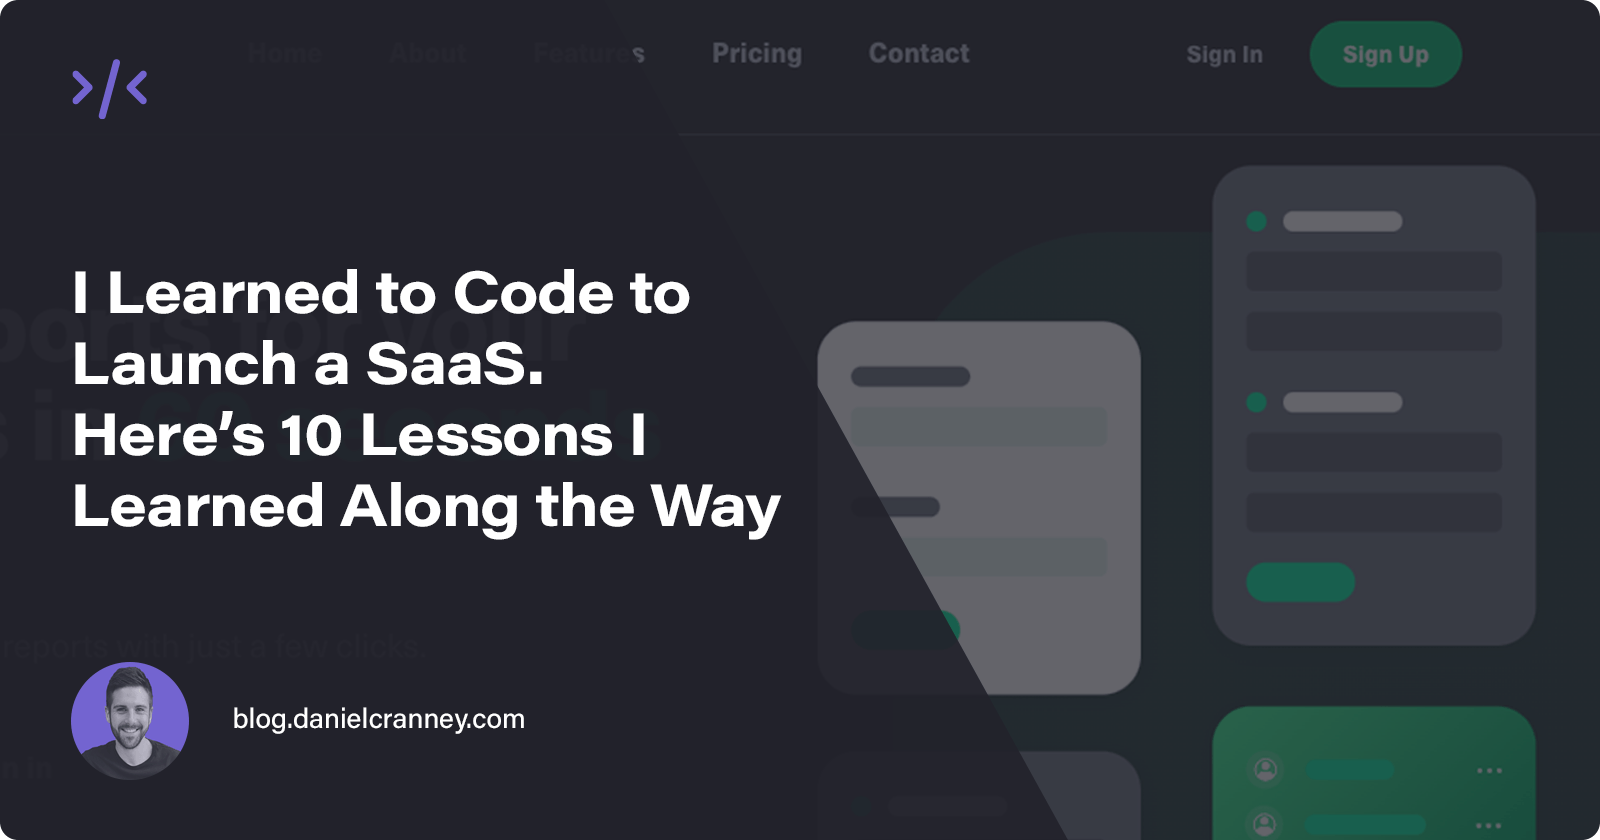 I Learned to Code to Launch a SaaS. Here’s 10 Lessons I Learned Along the Way.